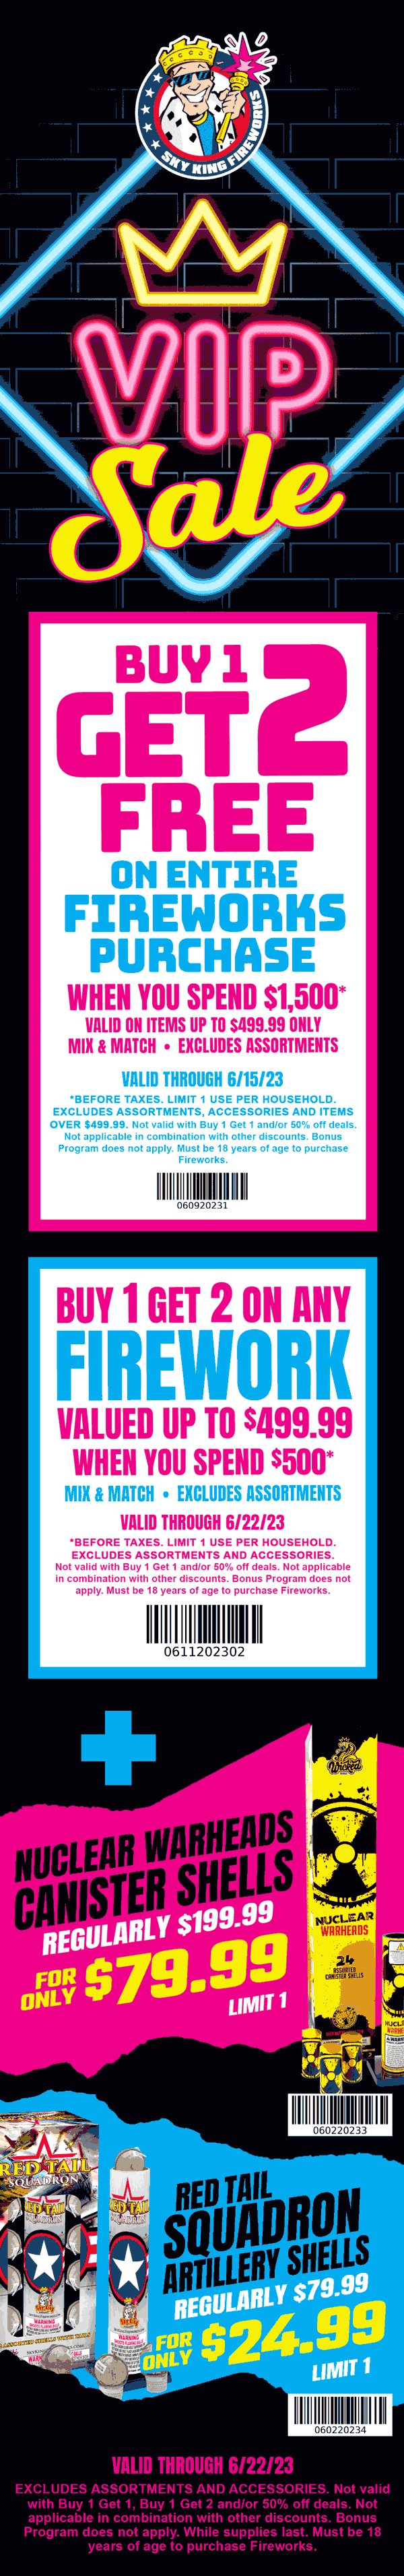 Sky King stores Coupon  3-for-1 on $500+ fireworks at Sky King #skyking 